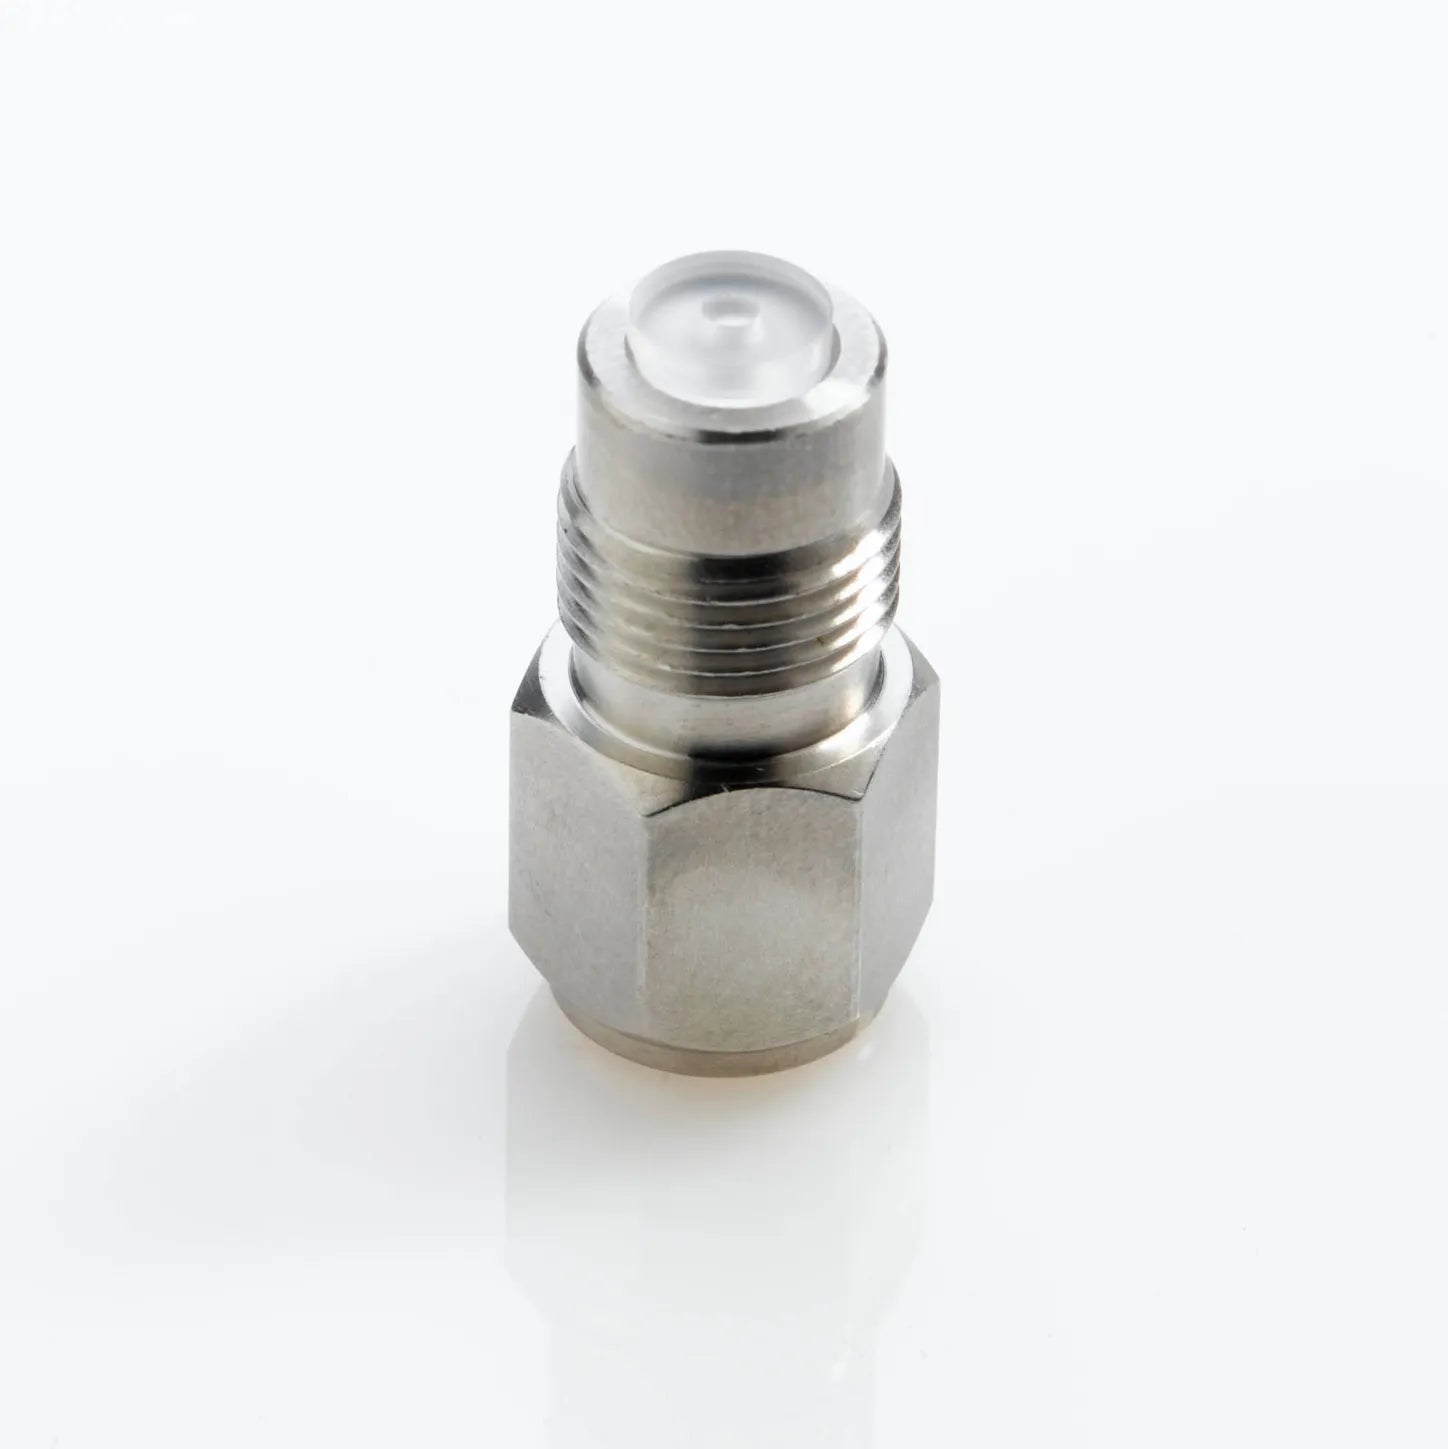 Outlet Check Valve, Comparable to Shimadzu # 228-34976-91